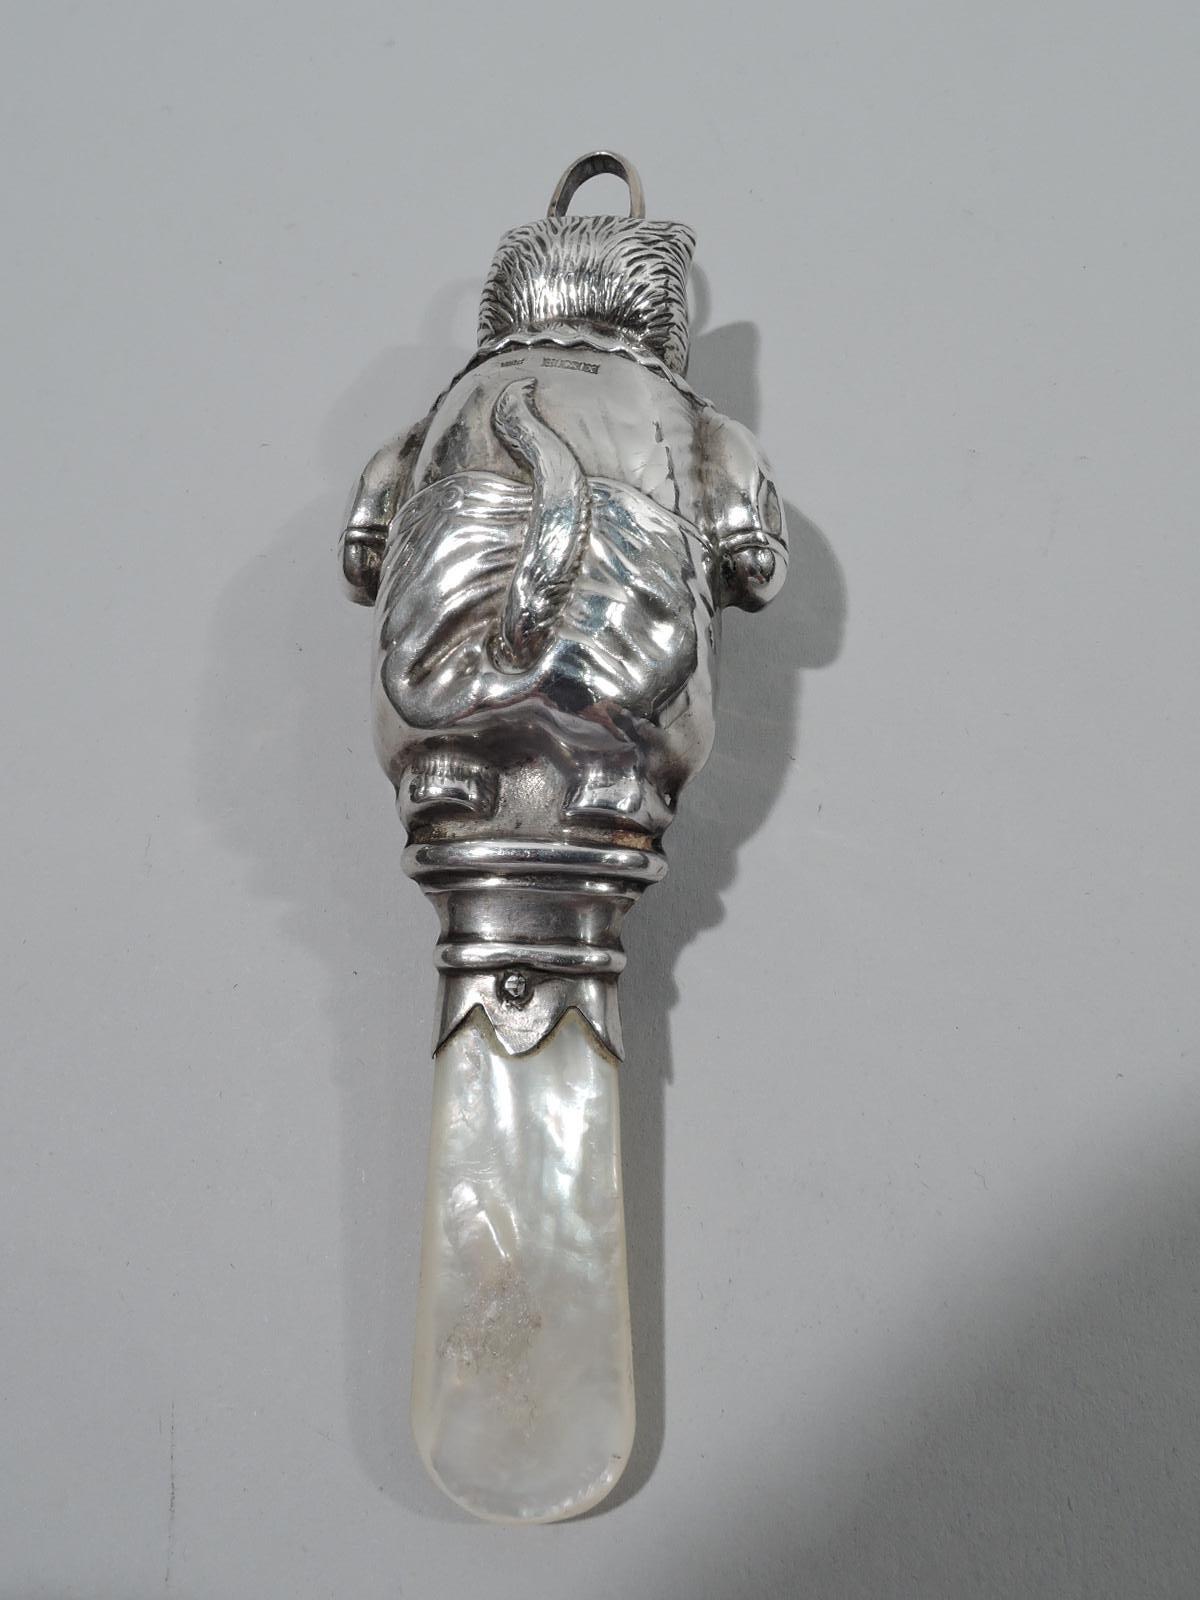 Delightful Victorian sterling silver rattle. Made by WH Collins & Co. in Birmingham in 1897. Kitty stands stiffly in snug fitting jacket and trousers. Only the tail is free to flick back and forth. A funny depiction of feline ill grace. A bit of a